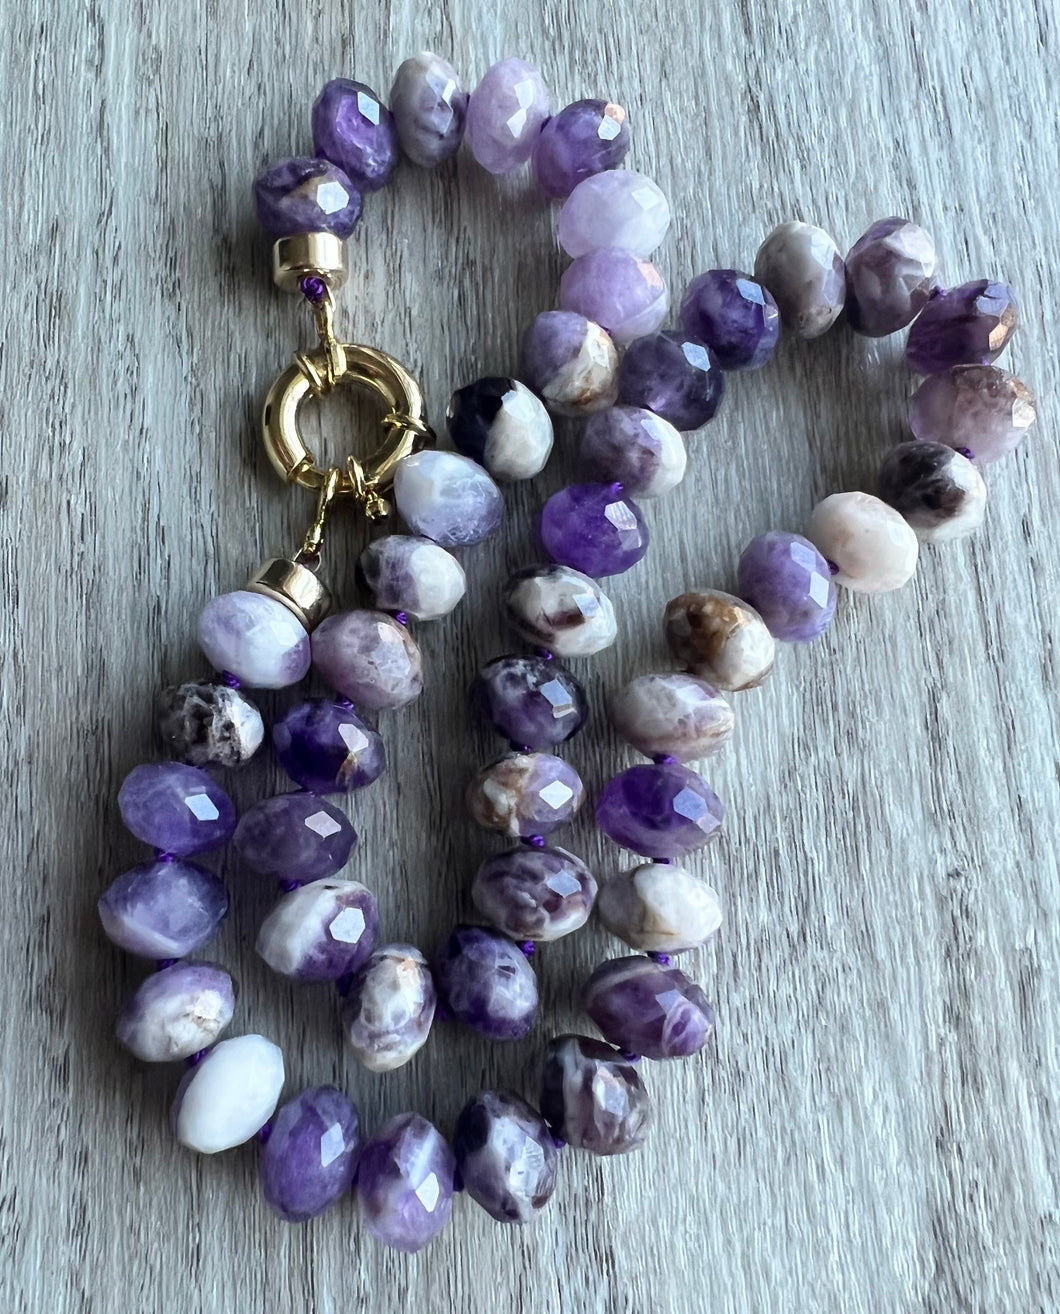 For the amethyst lover, these gorgeous 10mm faceted beauties are unforgettable.  Hand knotted on purple thread, this necklace measure 19 inches   Finished off with gold filled end caps and a gold filled sailor's clasp